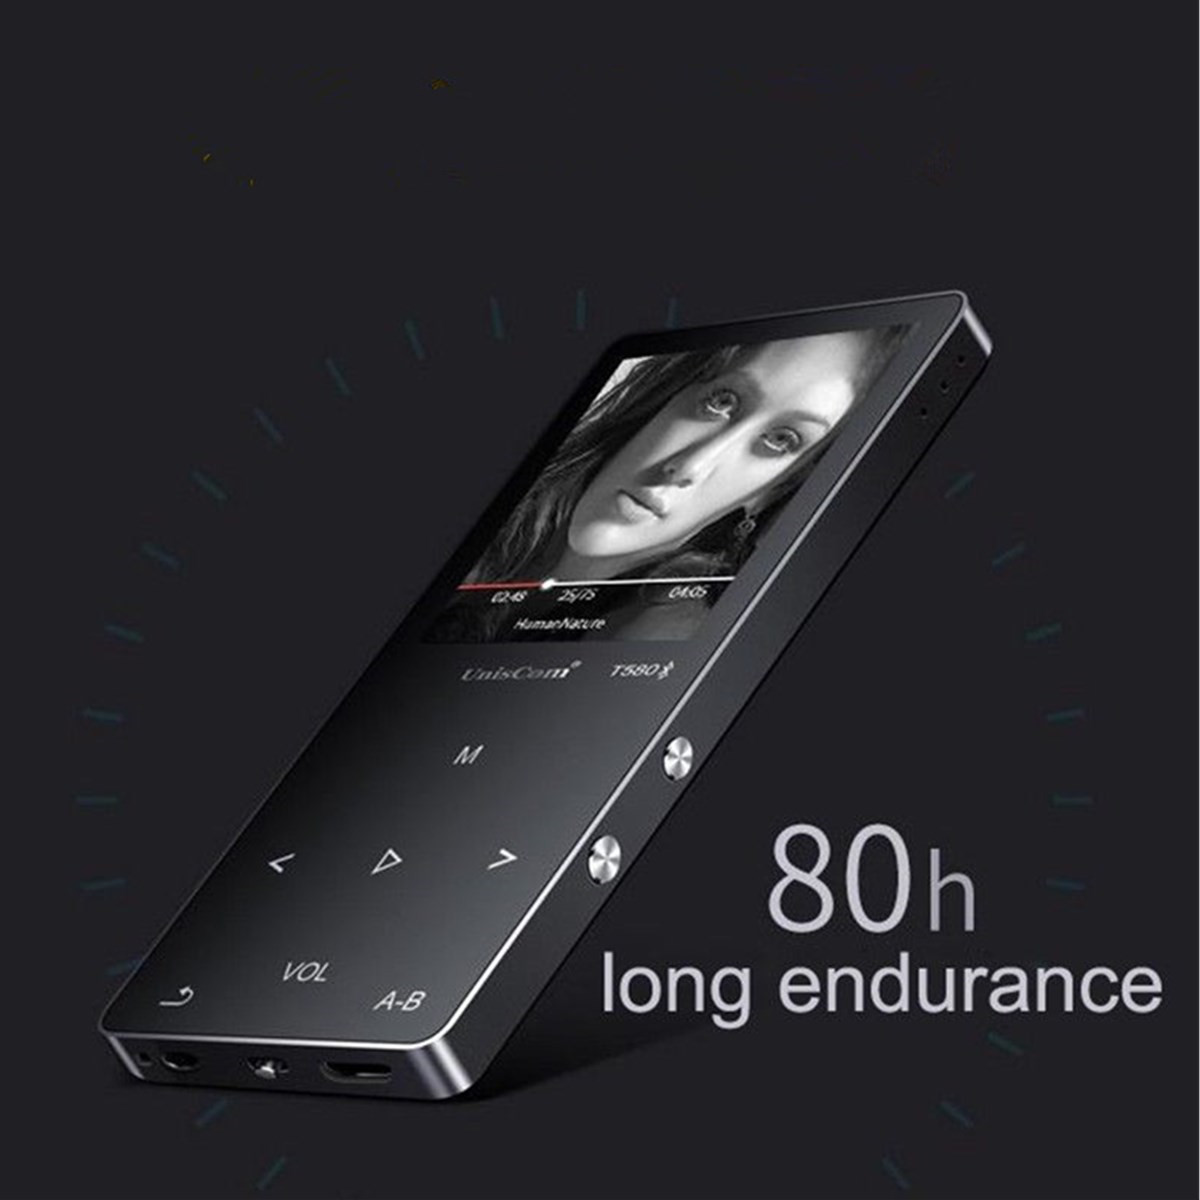 Uniscom 8G 1.8 Inch Screen bluetooth Lossless HIFI MP3 Music Player Support A-B Repeat Voice Record 69